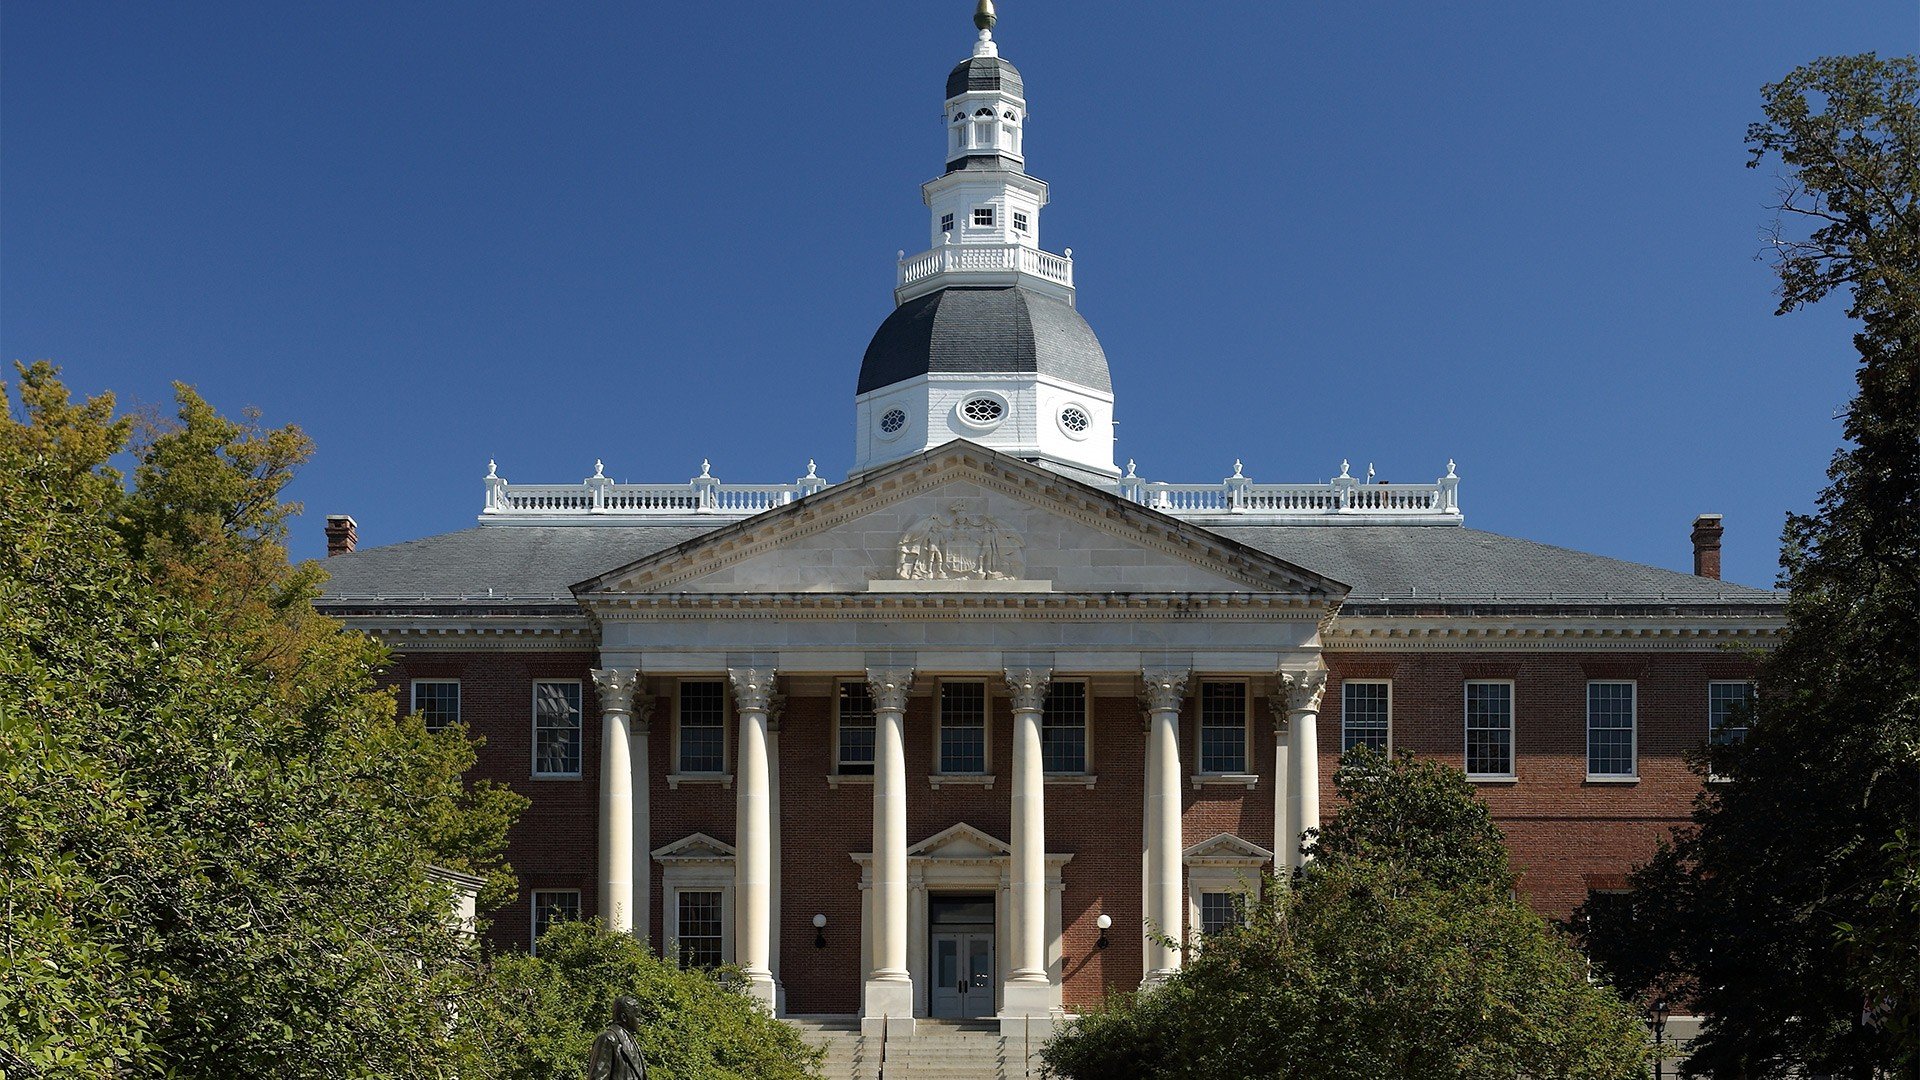 Online casino bill passes Maryland House vote just ahead of deadline